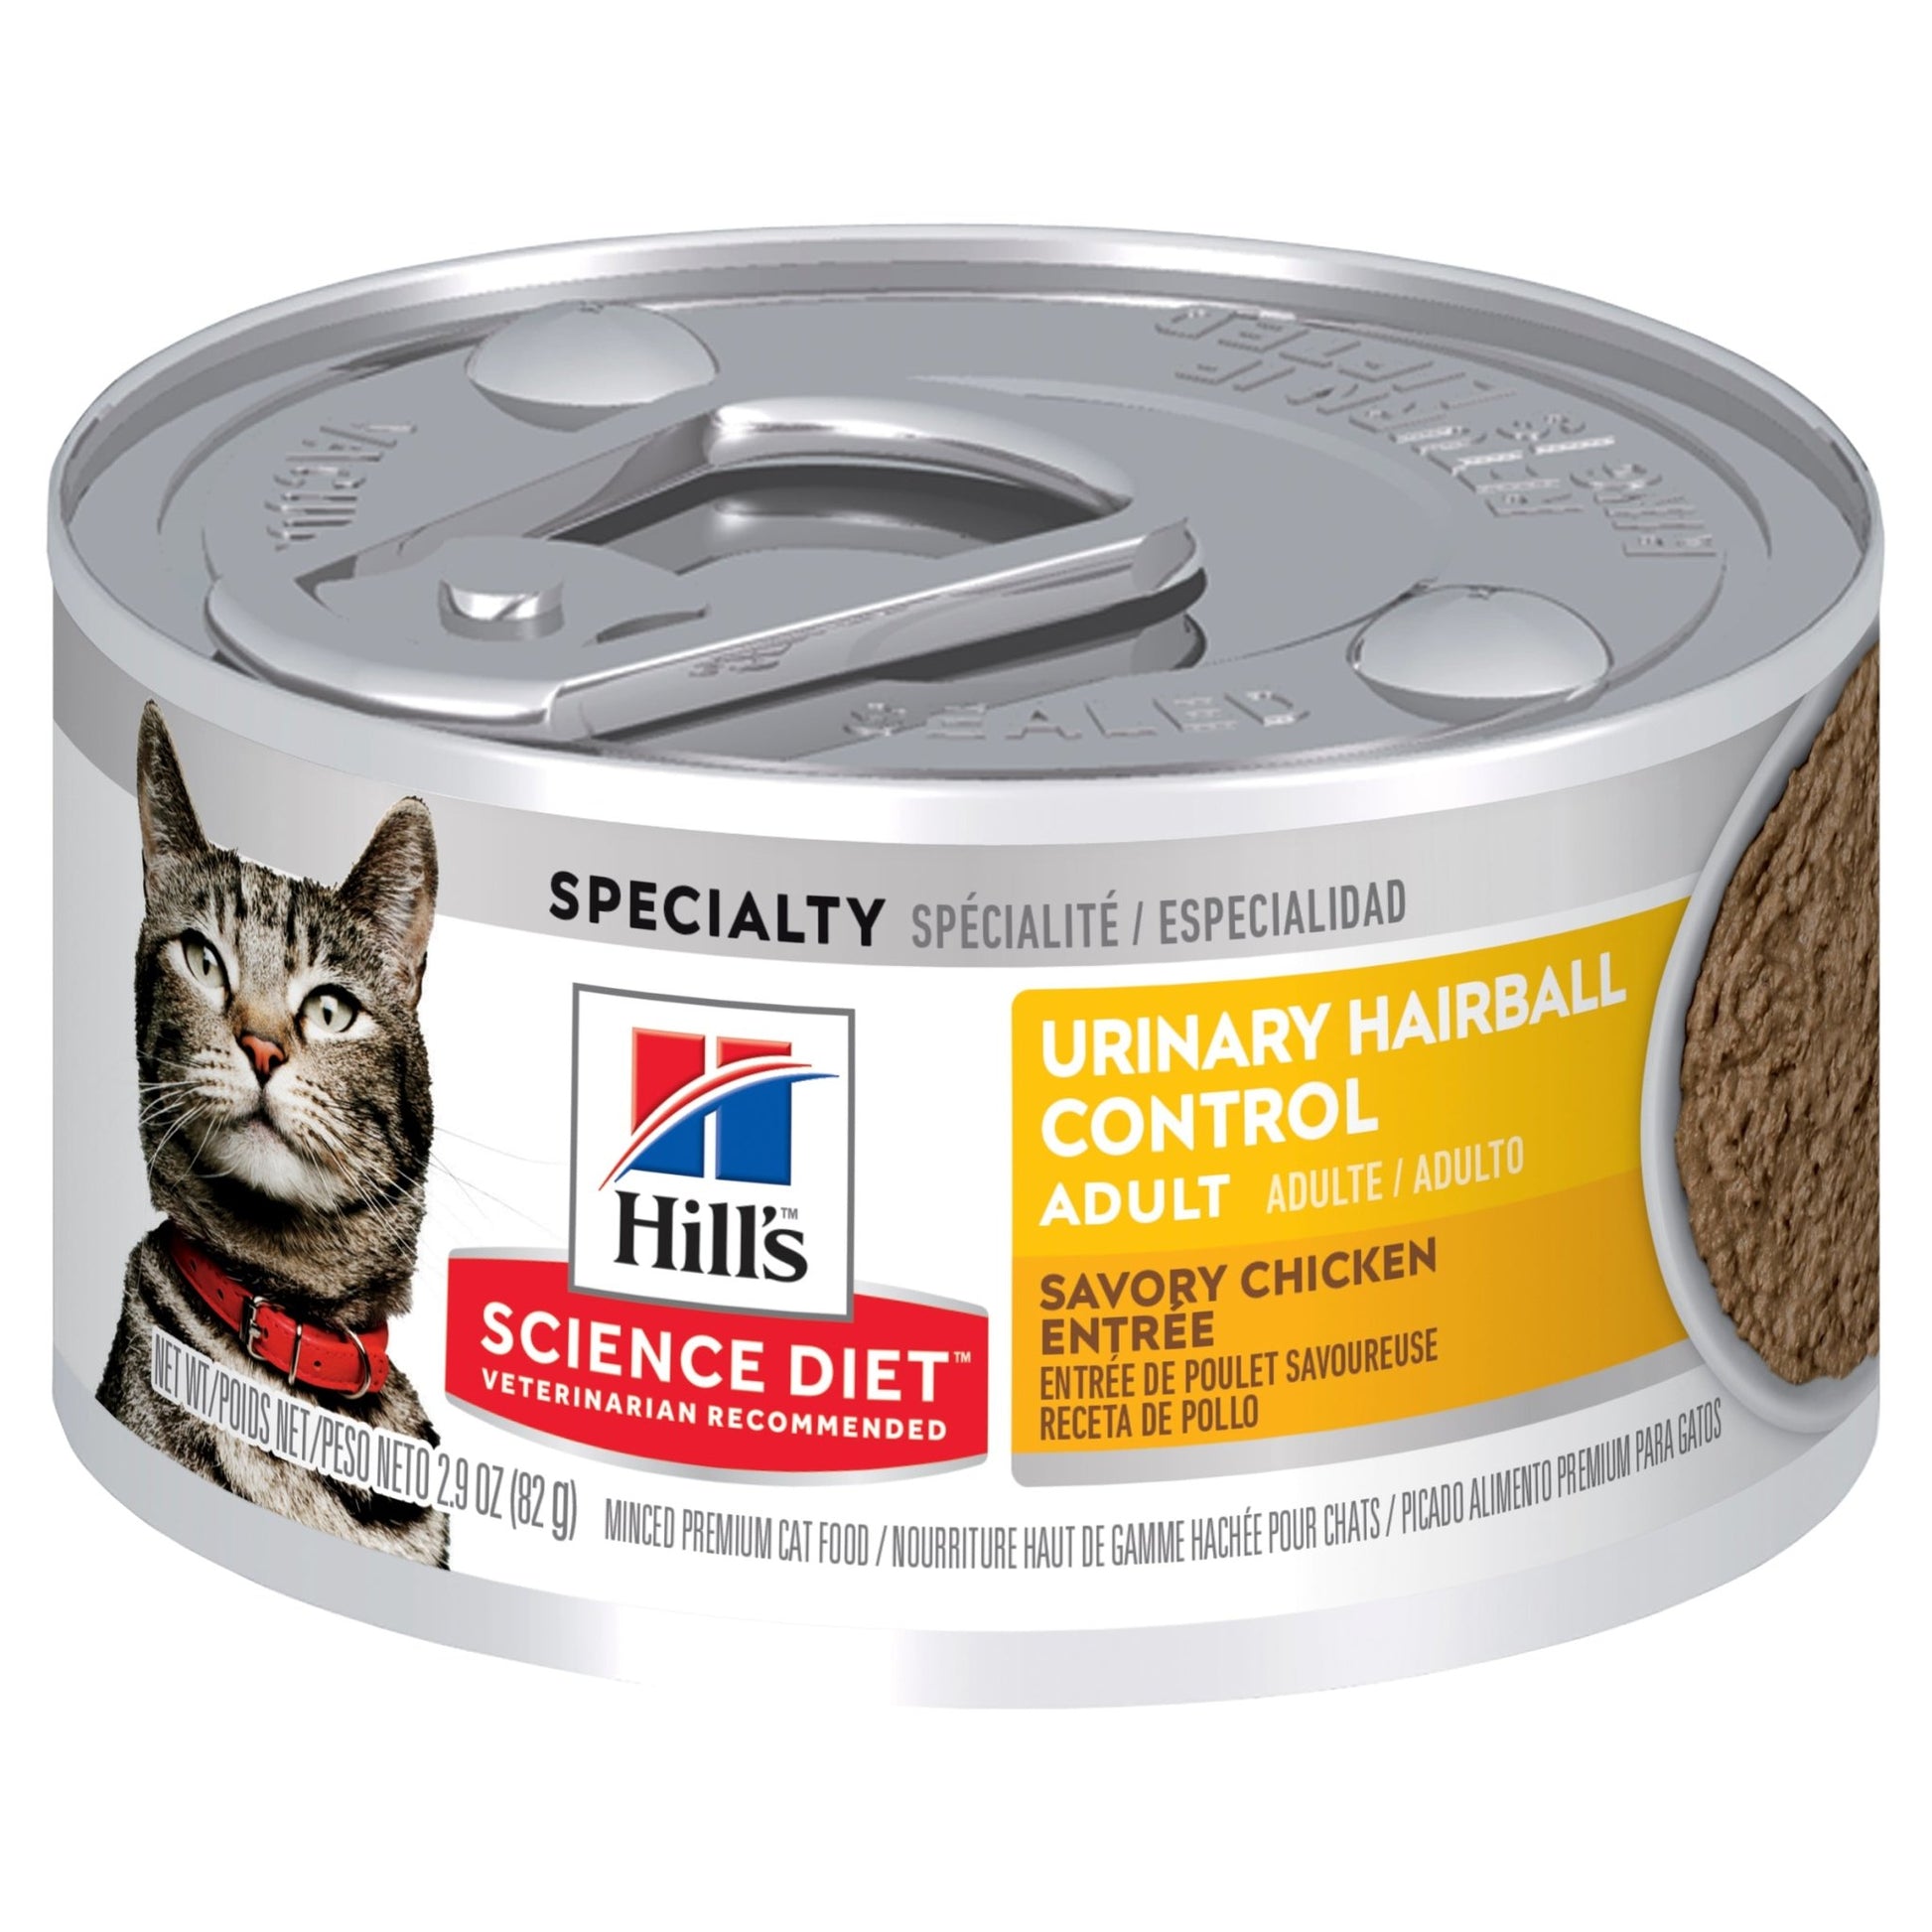 Hill's Science Diet Adult Urinary Hairball Control Canned Cat Food 24x82g - Woonona Petfood & Produce